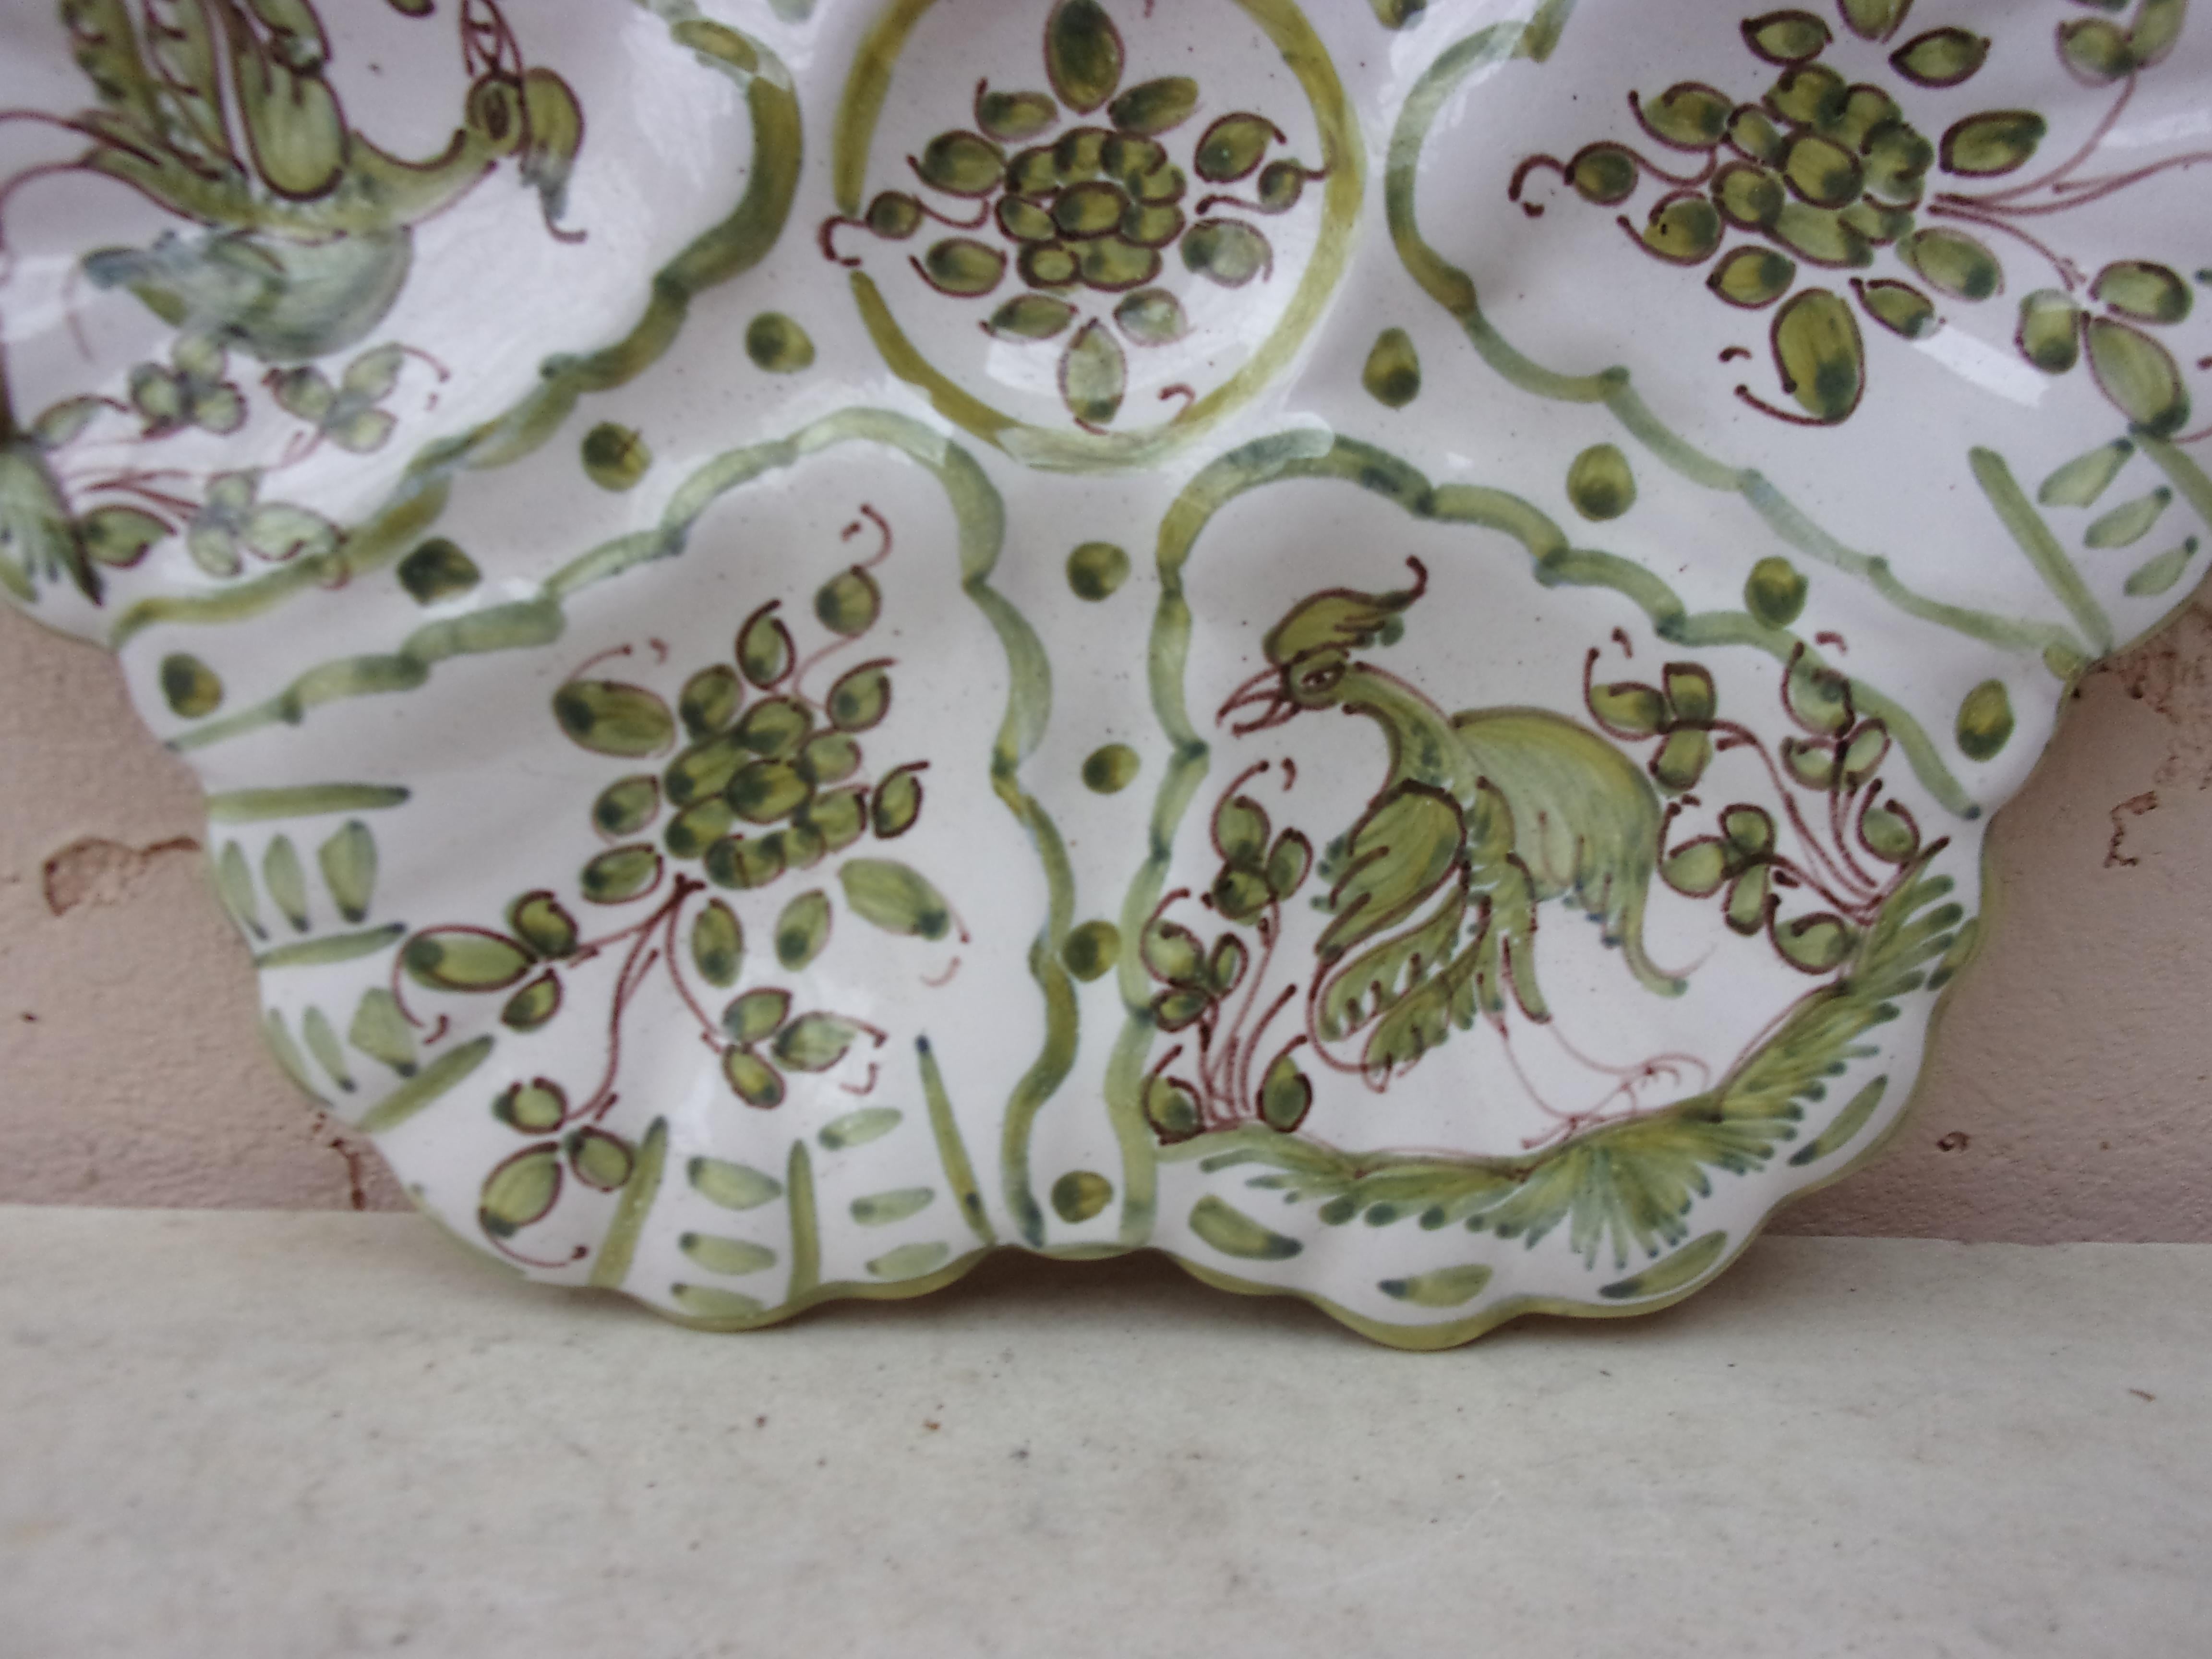 French Faience rustic oyster plate Moustiers style, circa 1940.
Painting of birds and flower on the center.